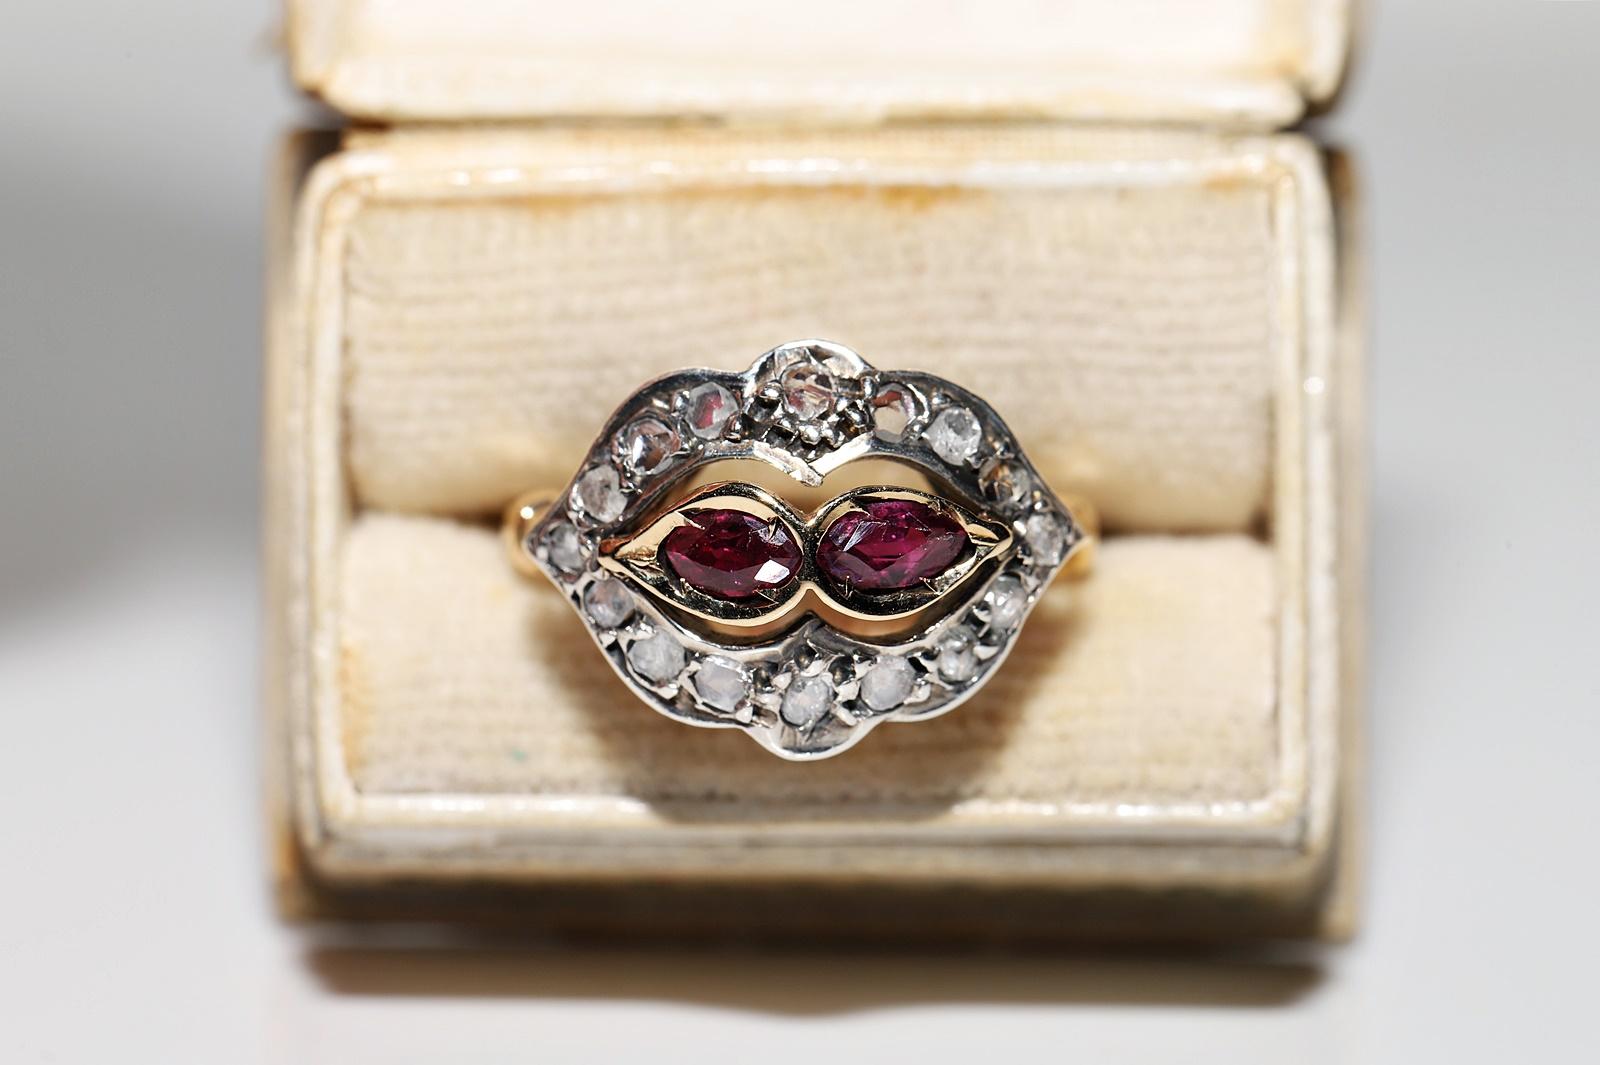 In very good condition.
Total weight 4.9 grams.
Totally is diamond 0.50 ct.
The diamond is has I-J-K color and s1-s2-s3-Pique1.
Totally is ruby 0.60 ct.
Ring size is us 6.5 (We can make any size)
We offer free resizing.
Box is not included.
Please